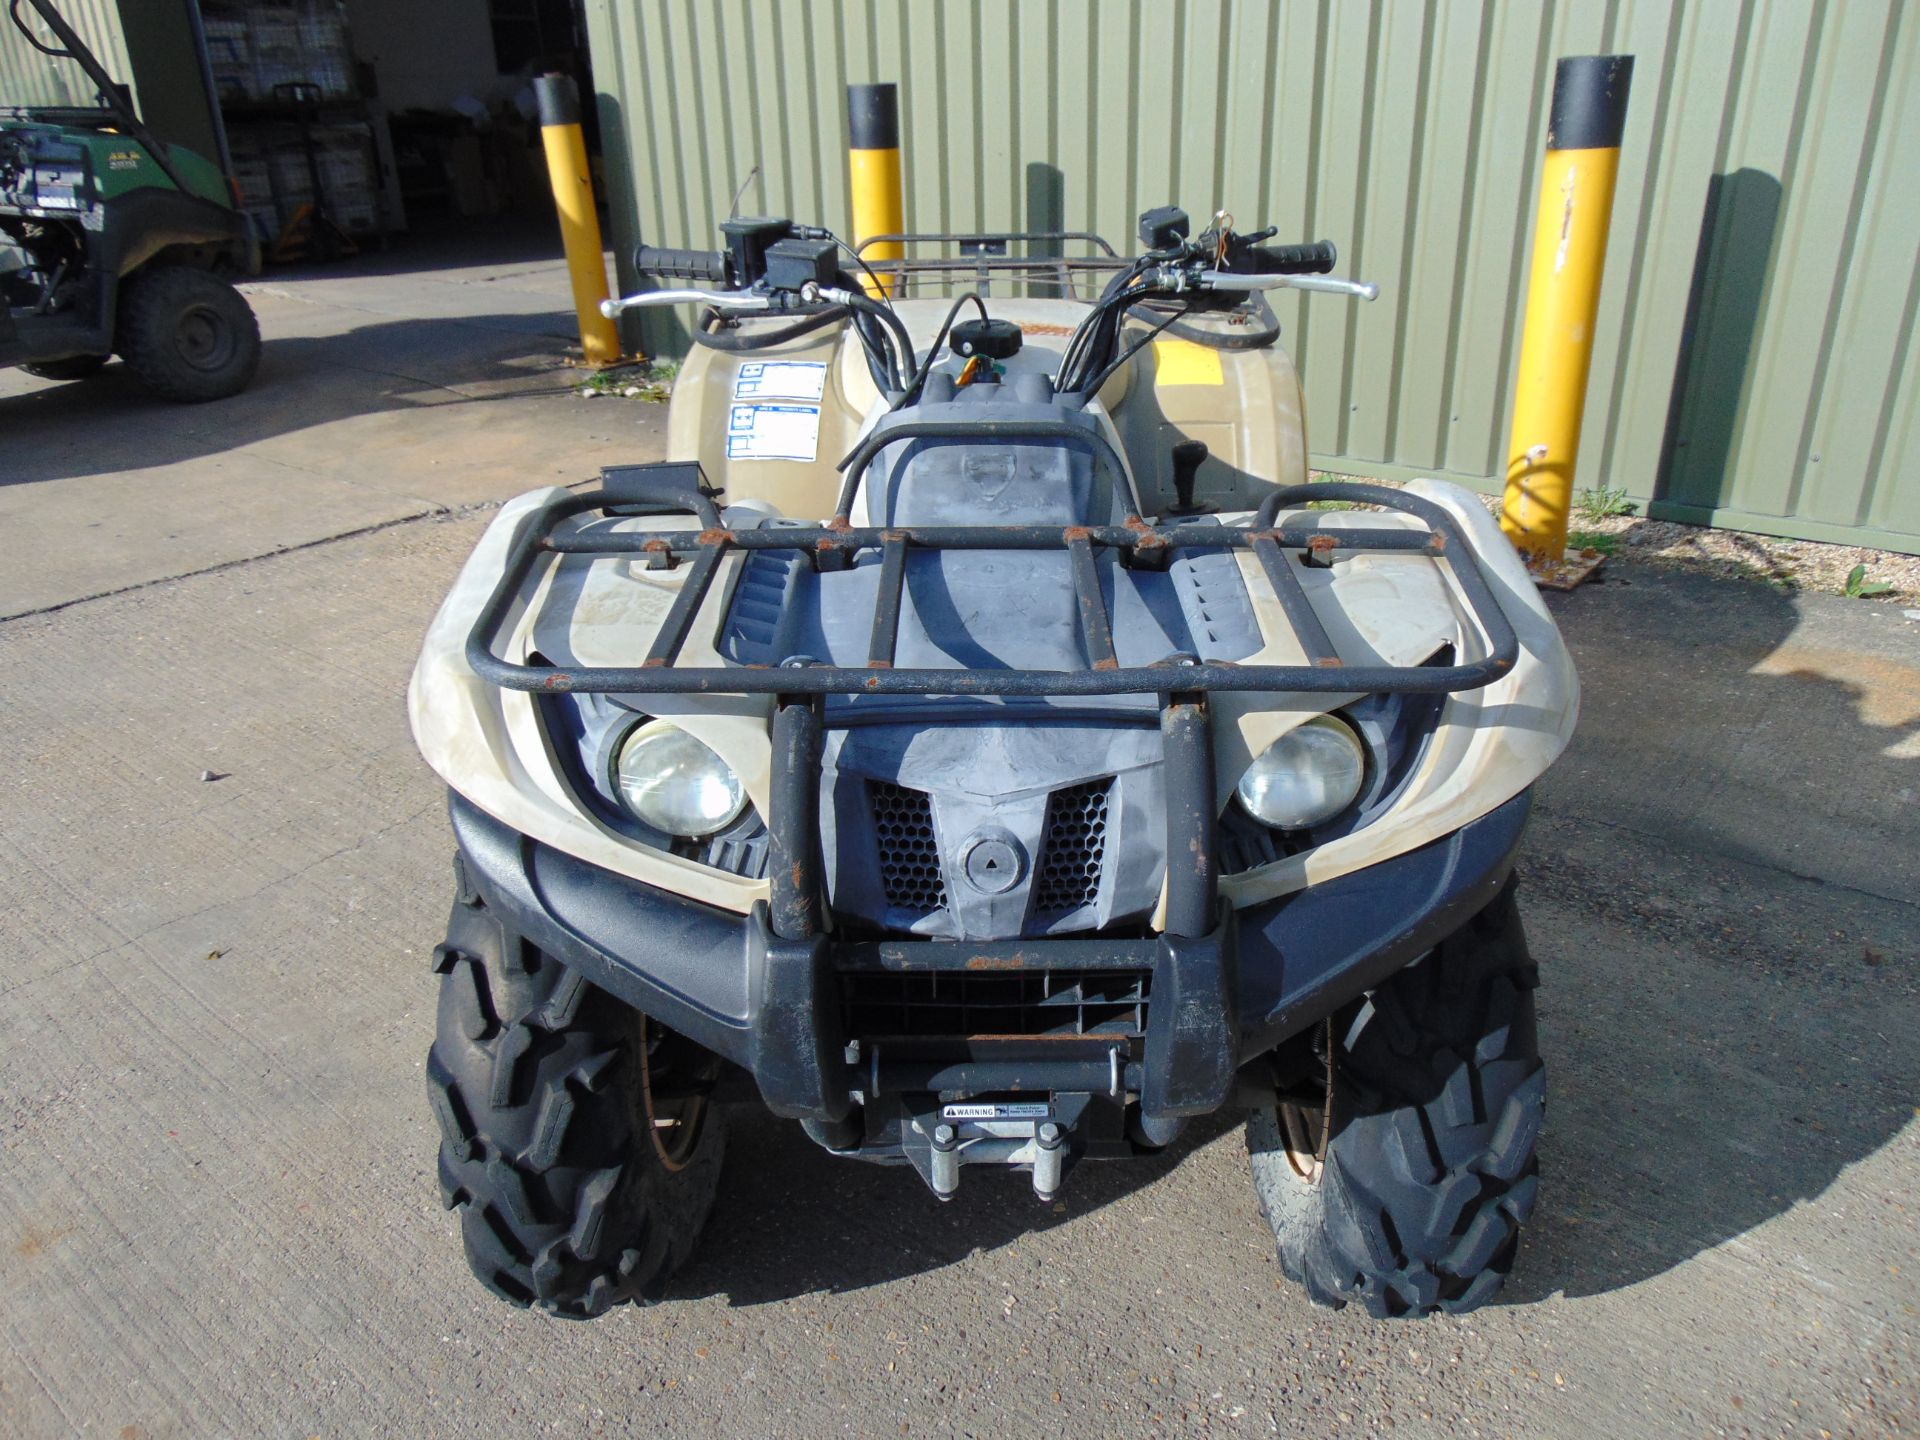 Recent Release Military Specification Yamaha Grizzly 450 4 x 4 ATV Quad Bike - Image 2 of 15